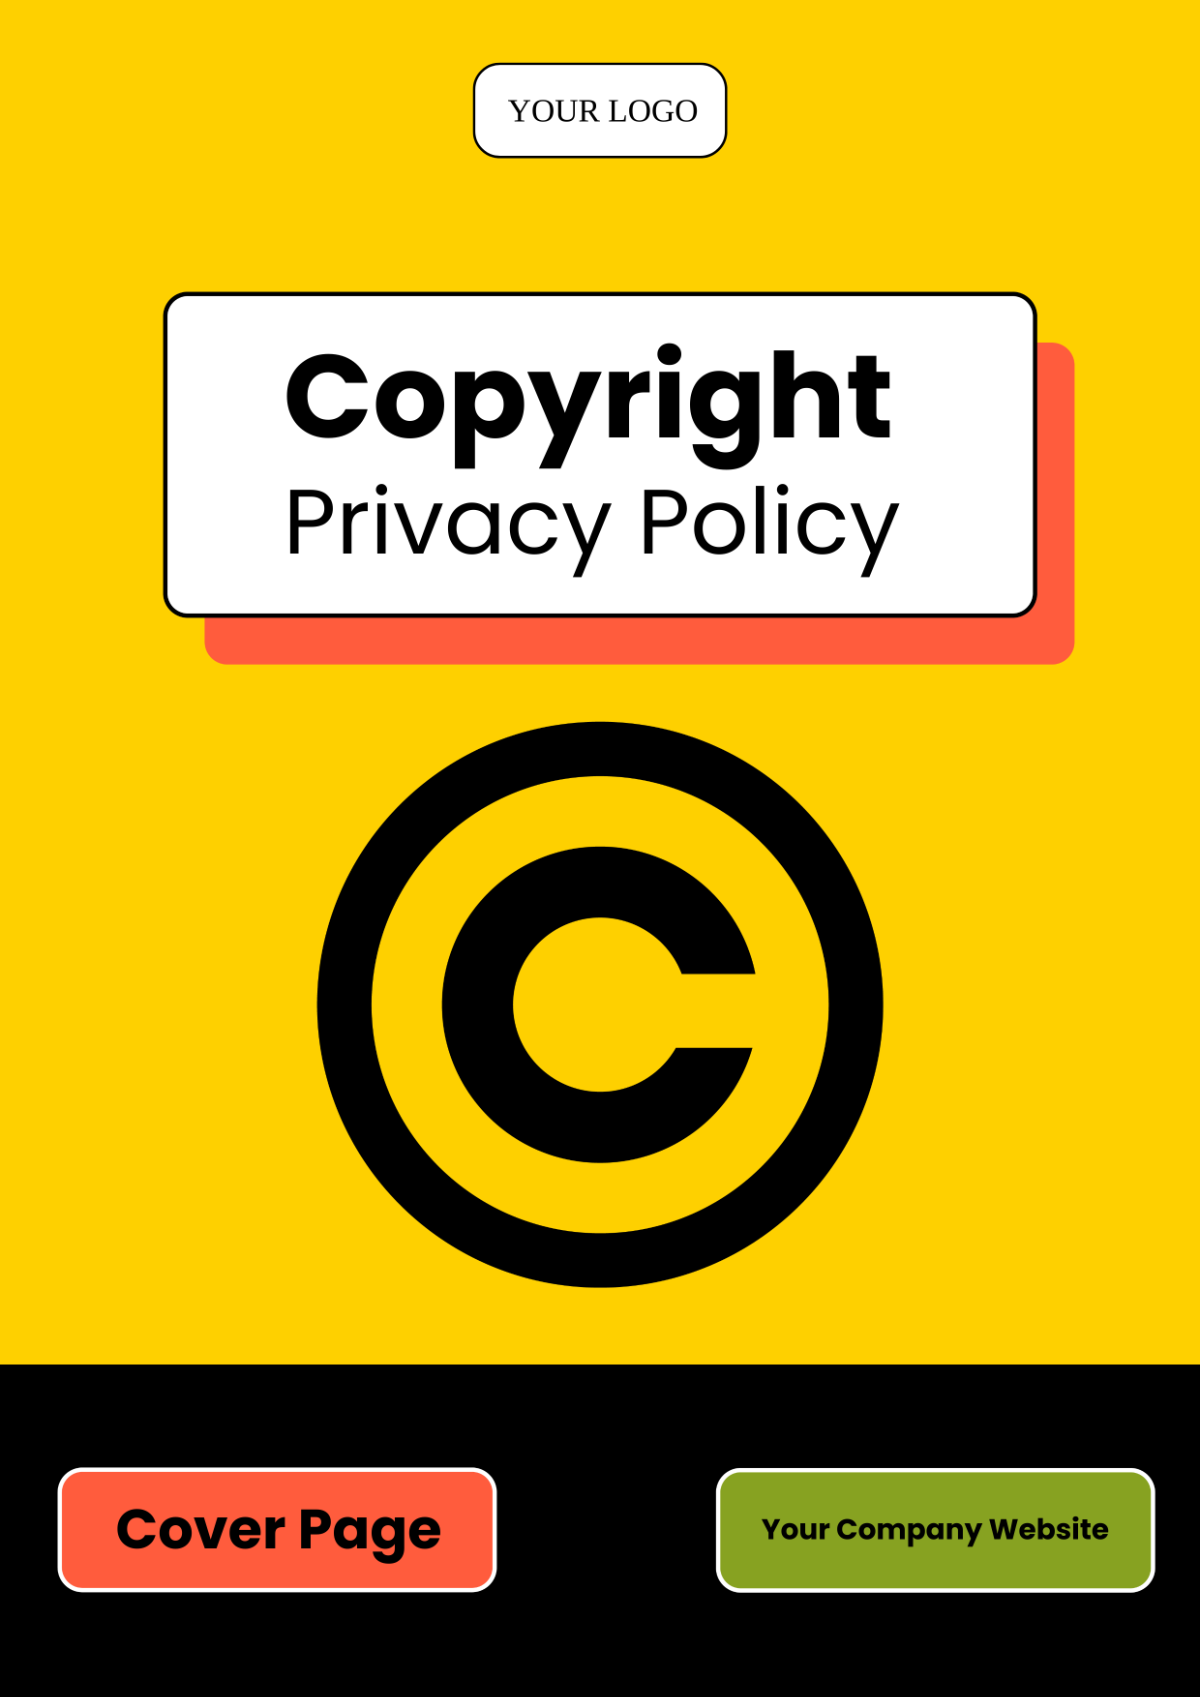 Copyright Privacy Policy Cover Page